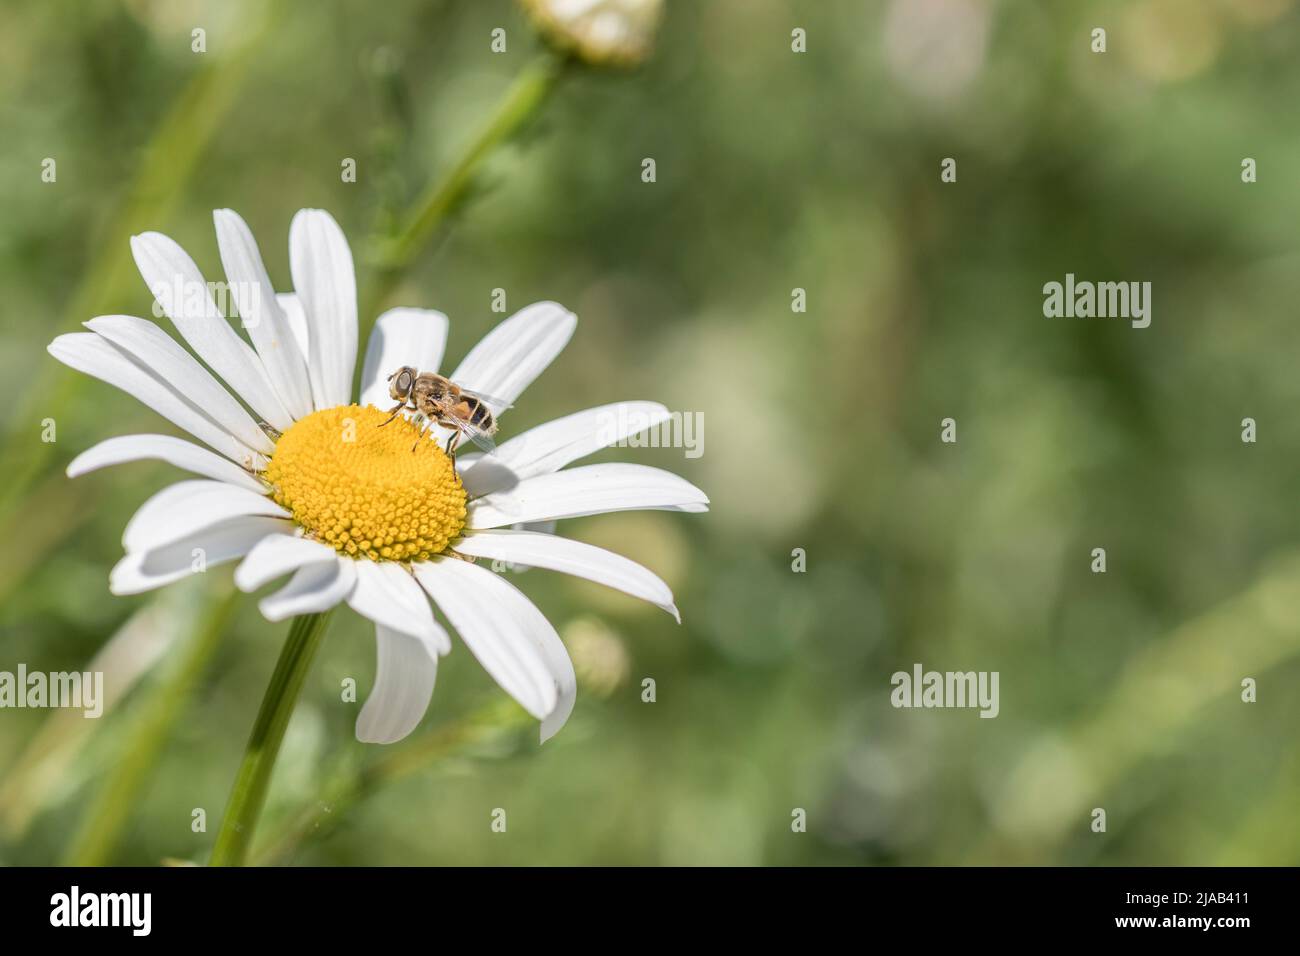 Close-up shot of wasp-like winged insect on single white flower of Oxeye Daisy / Leucanthemum vulgare in sunshine. Oxeye Daisy used in herbal cures. Stock Photo